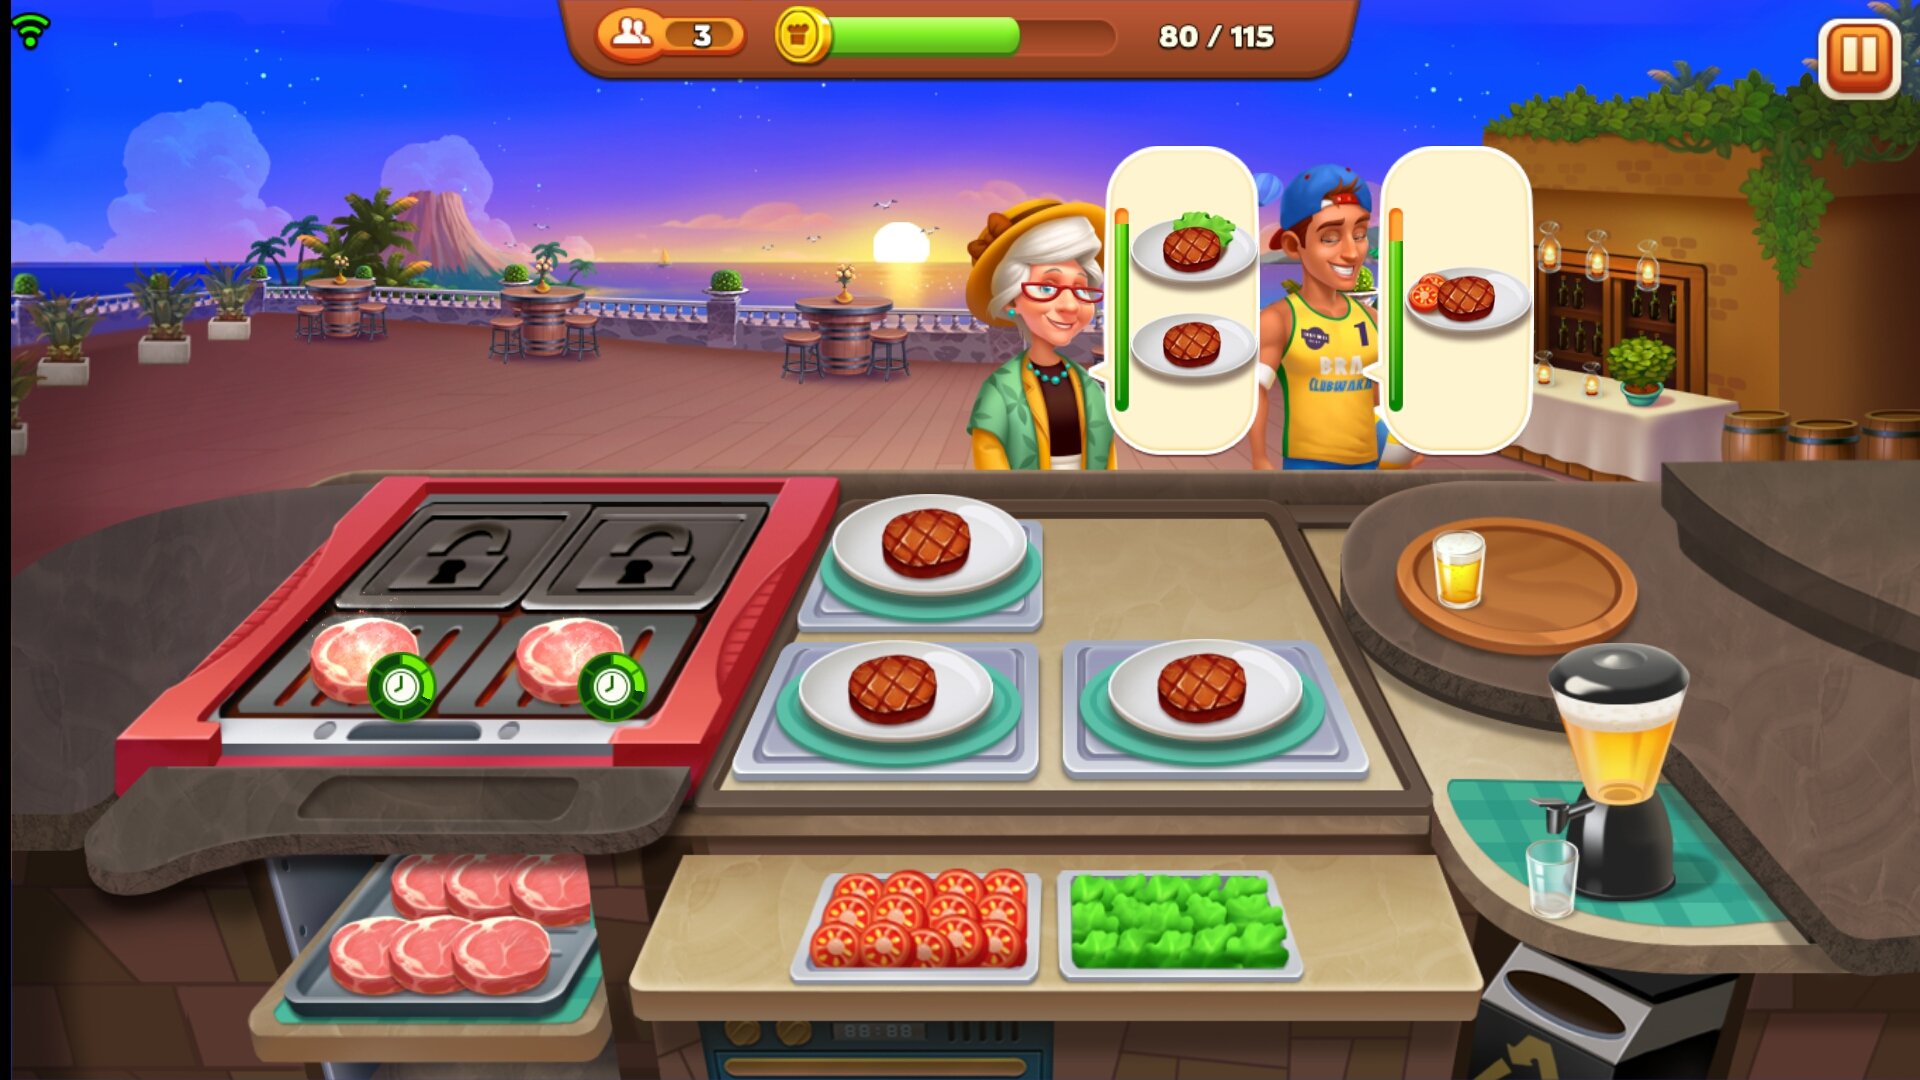 Cooking Live: Restaurant game download the last version for android